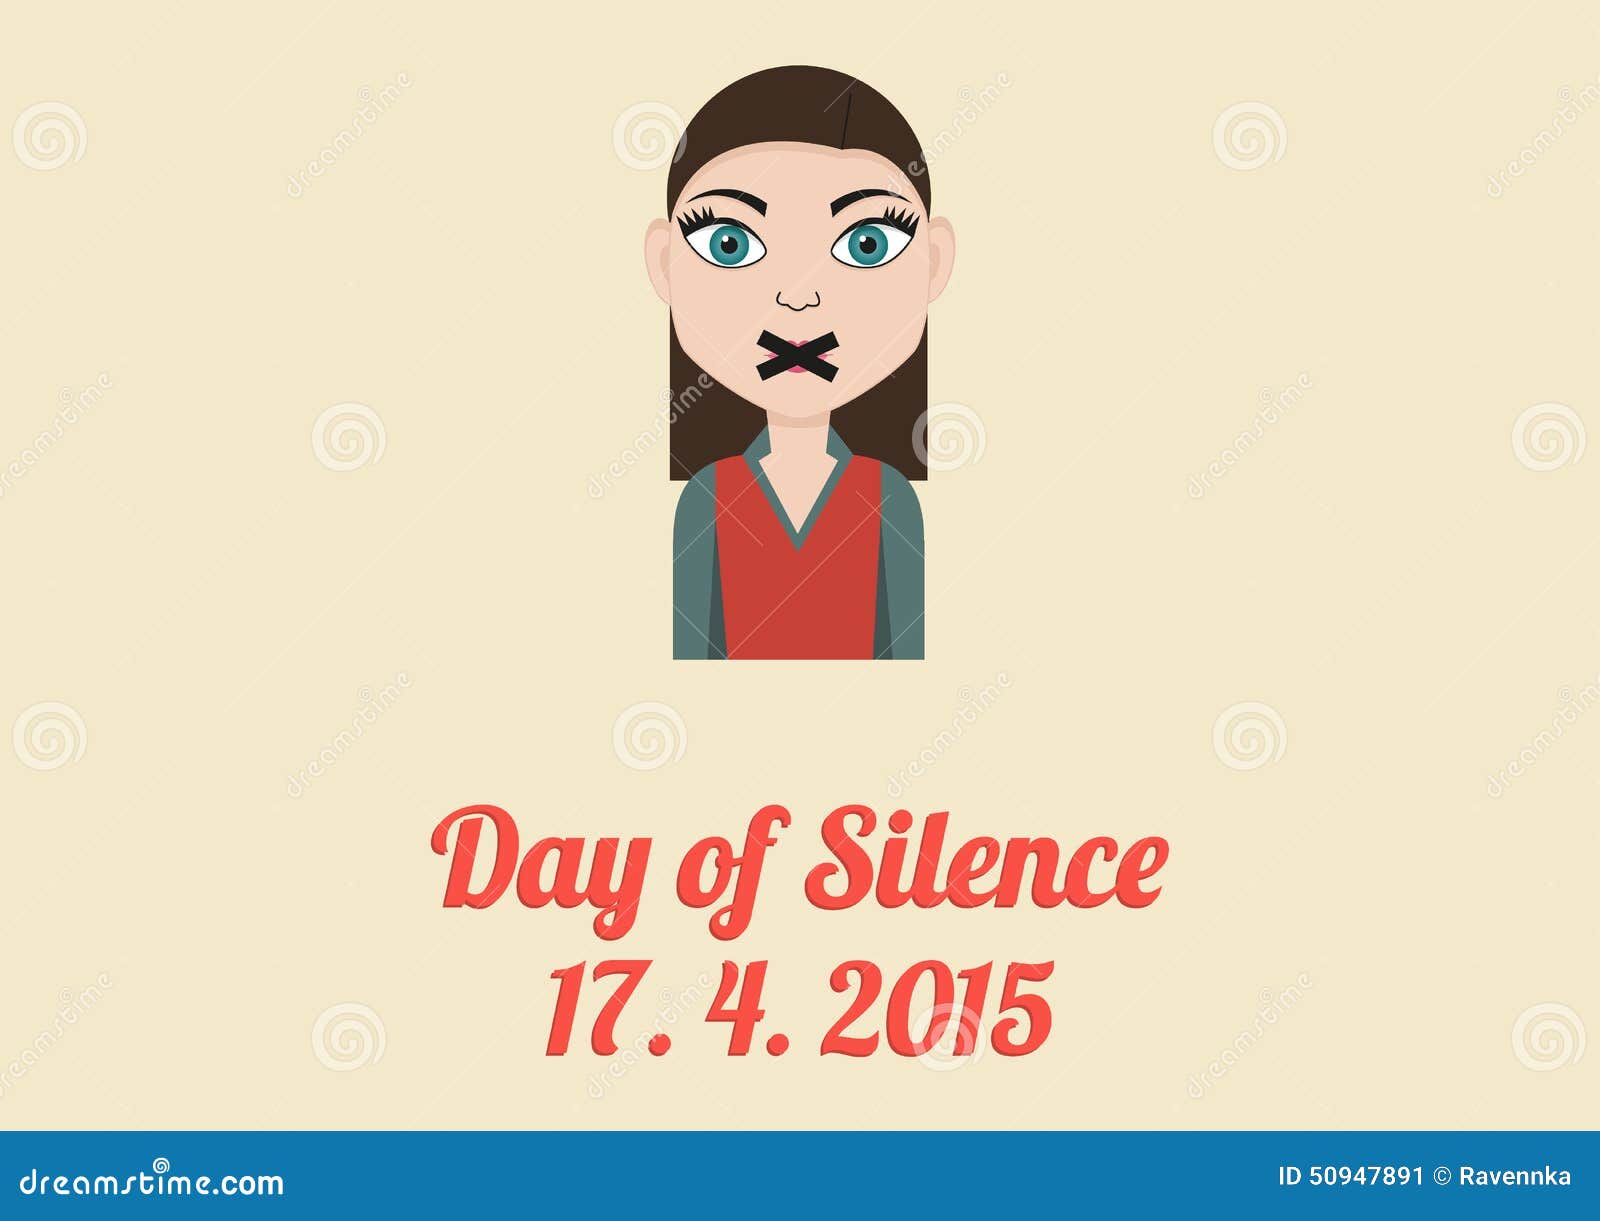 moment of silence clipart